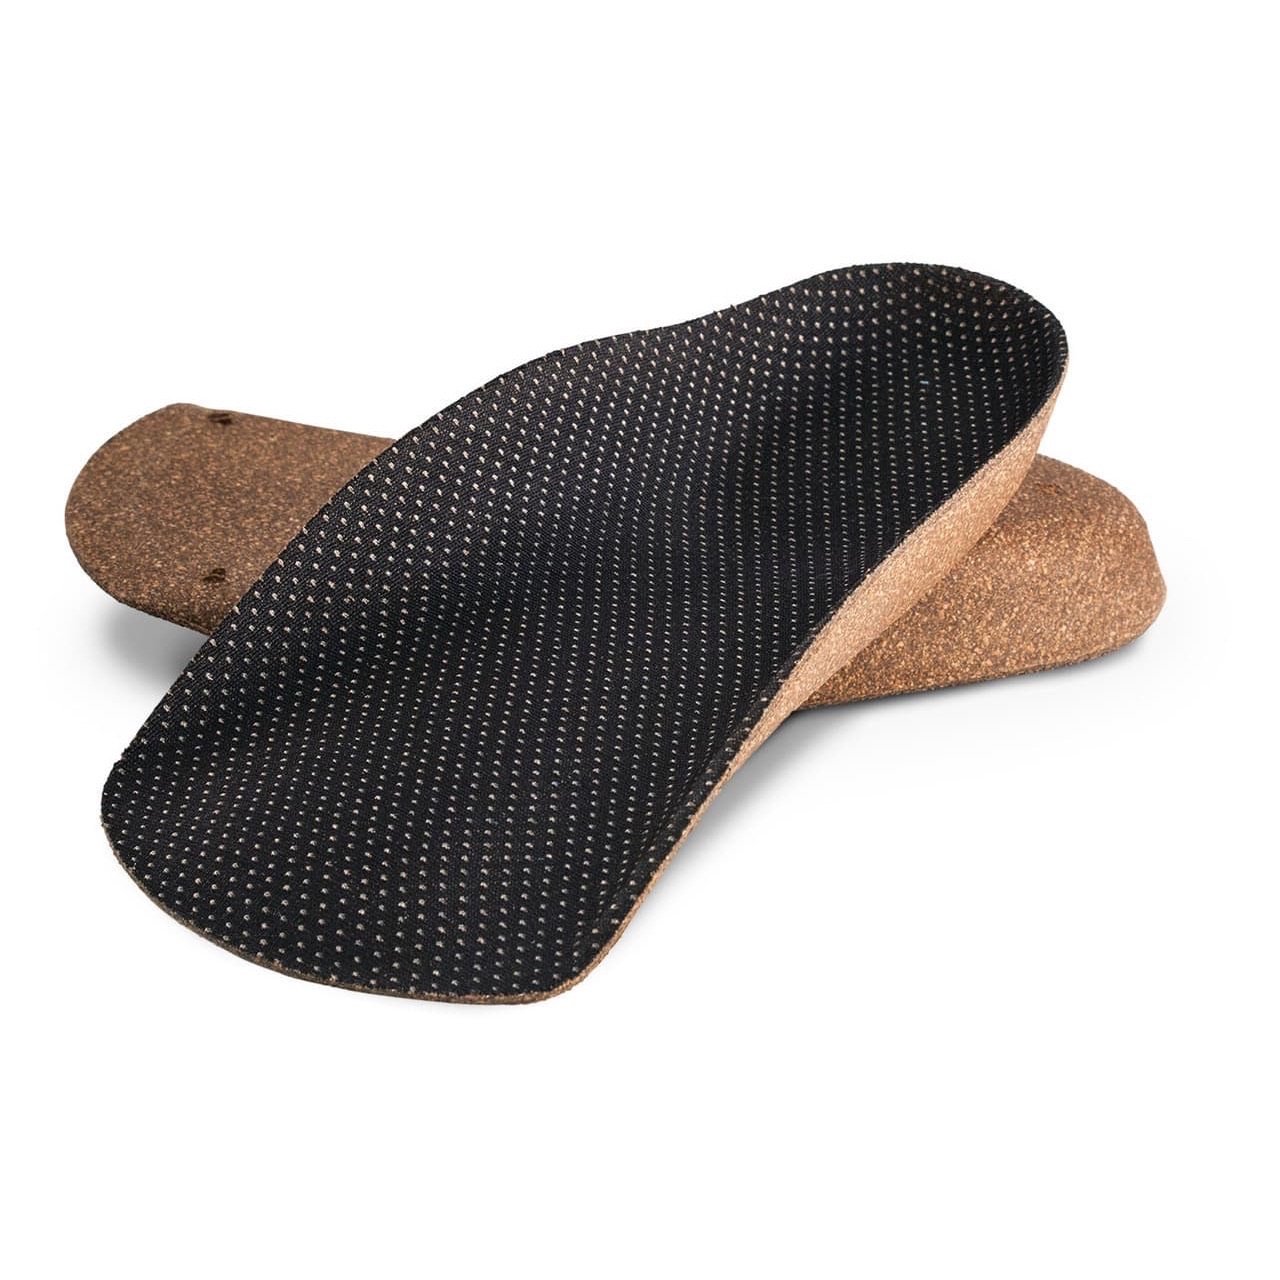 KFG 3/4 Orthotic Insoles - Cork Base - Kicks For Gents - Insole - Insole, MADE IN USA